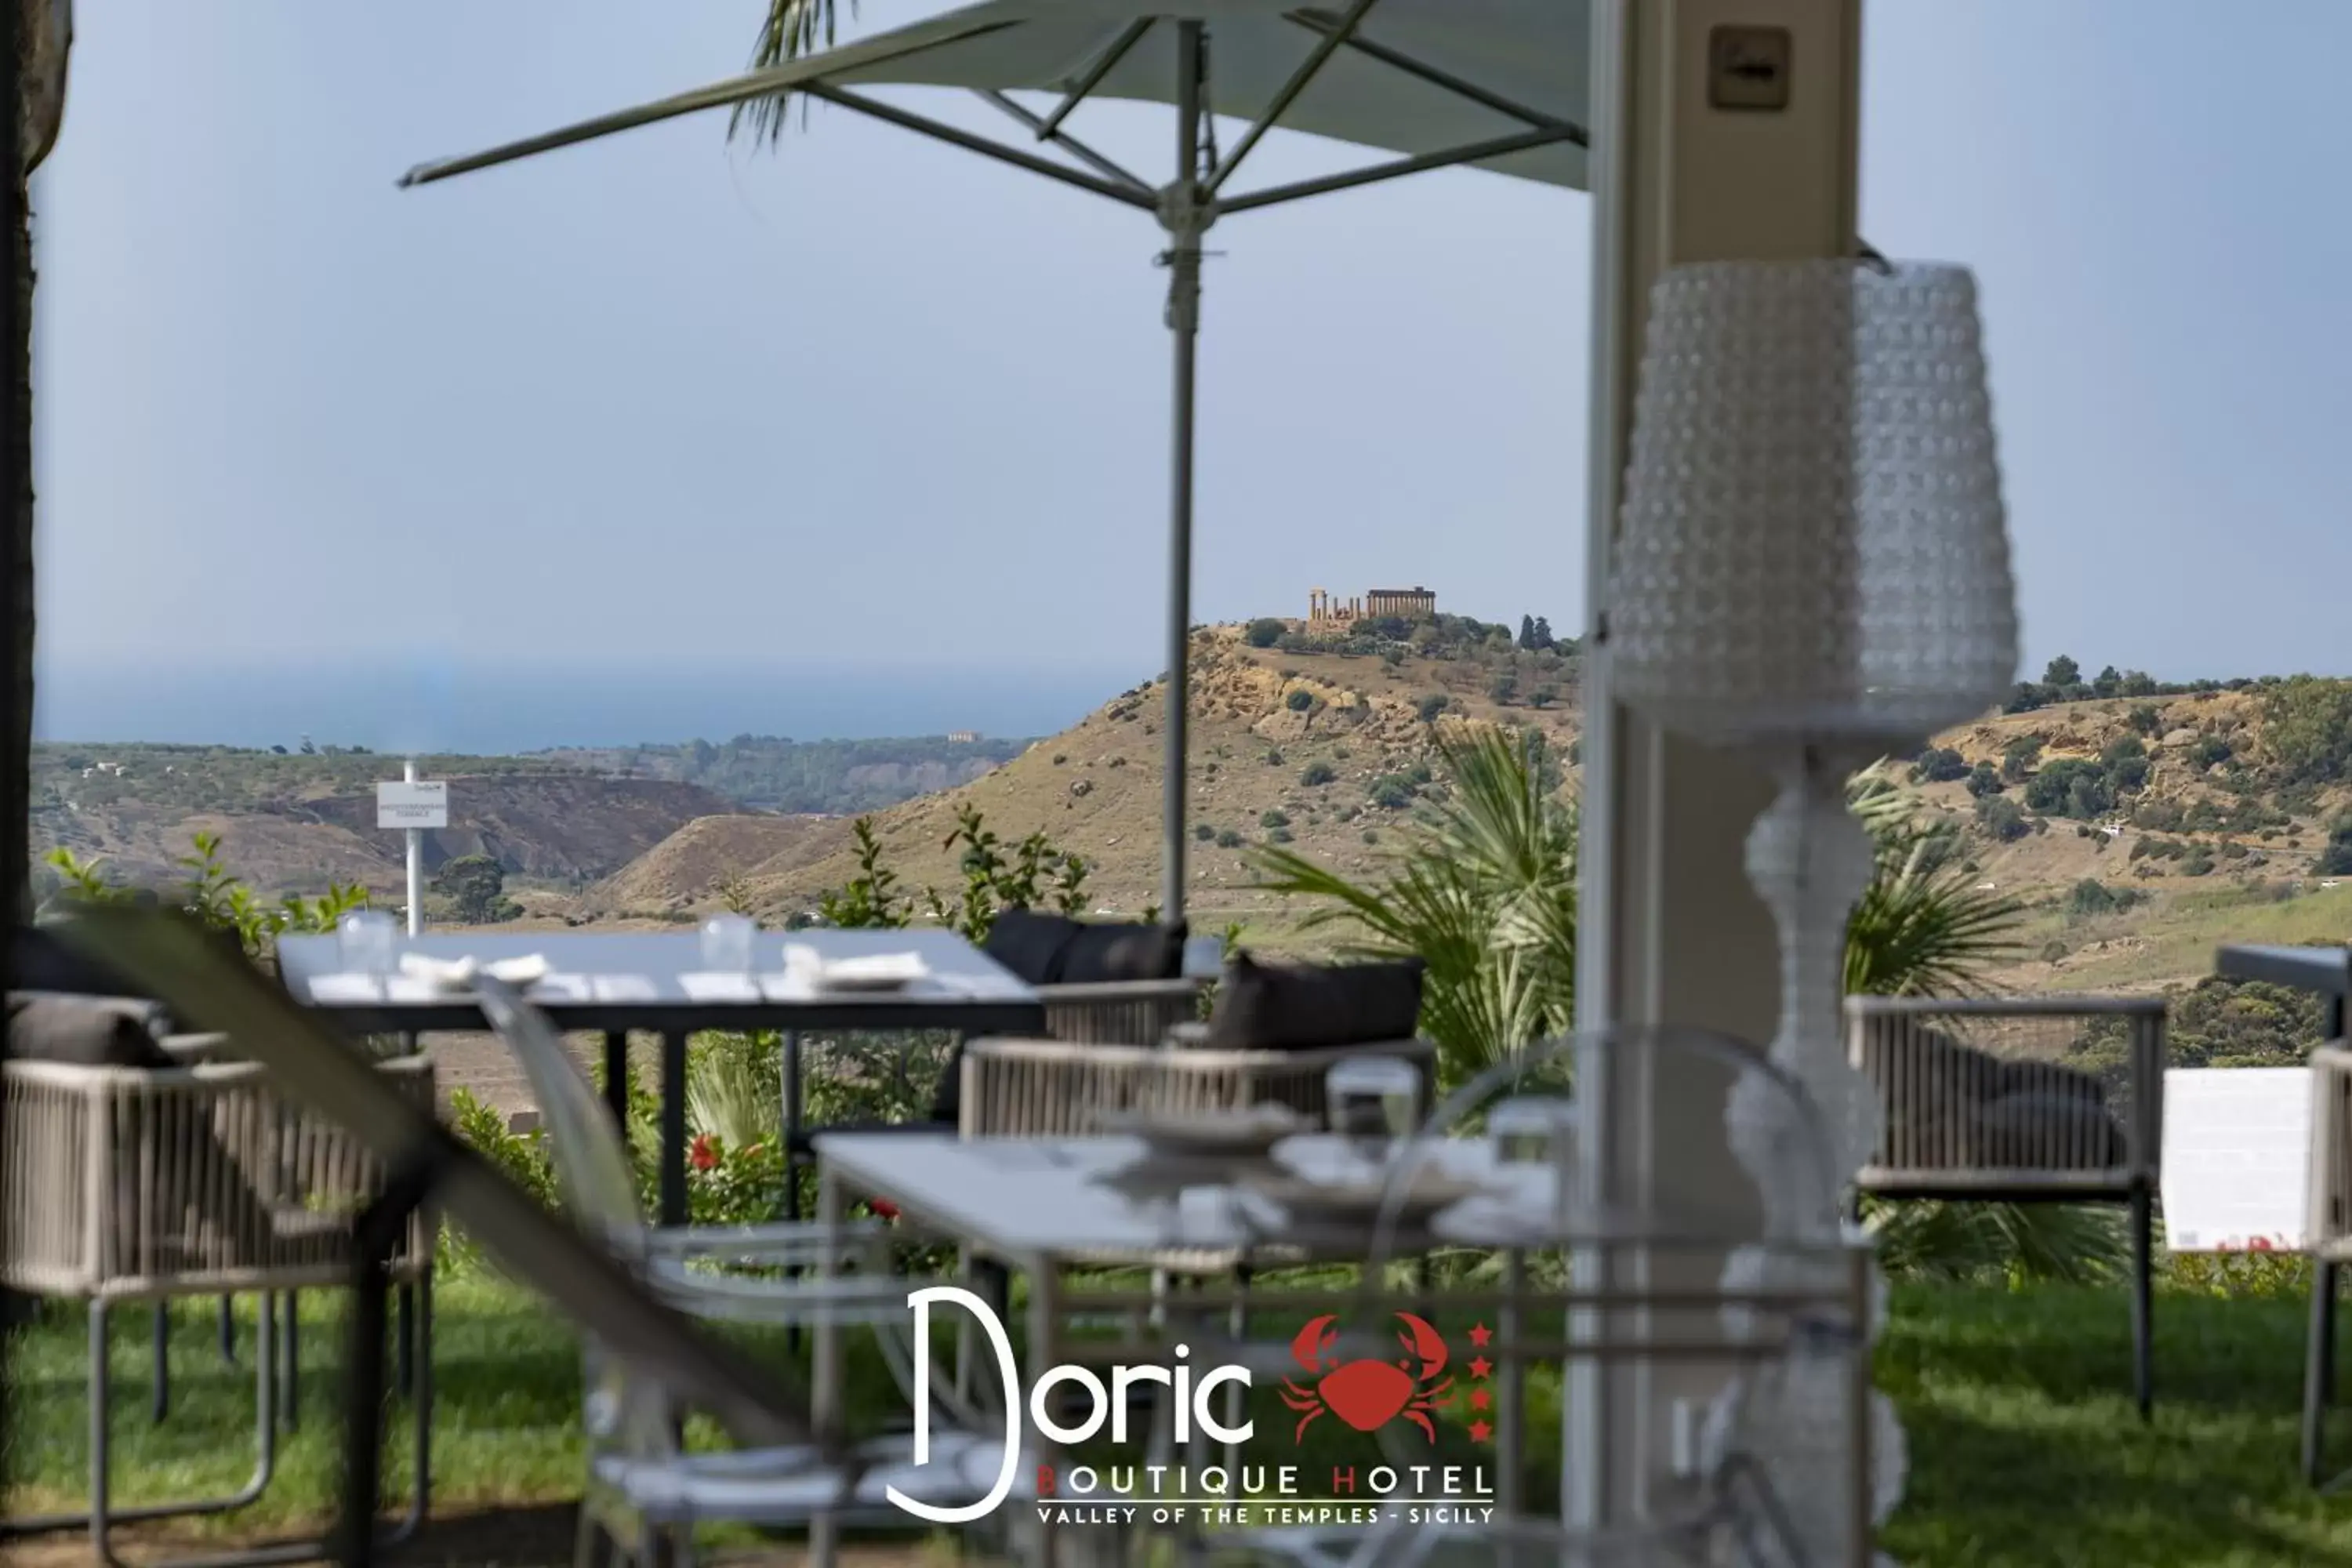 Restaurant/places to eat in Doric Eco Boutique Resort & Spa - Sicily